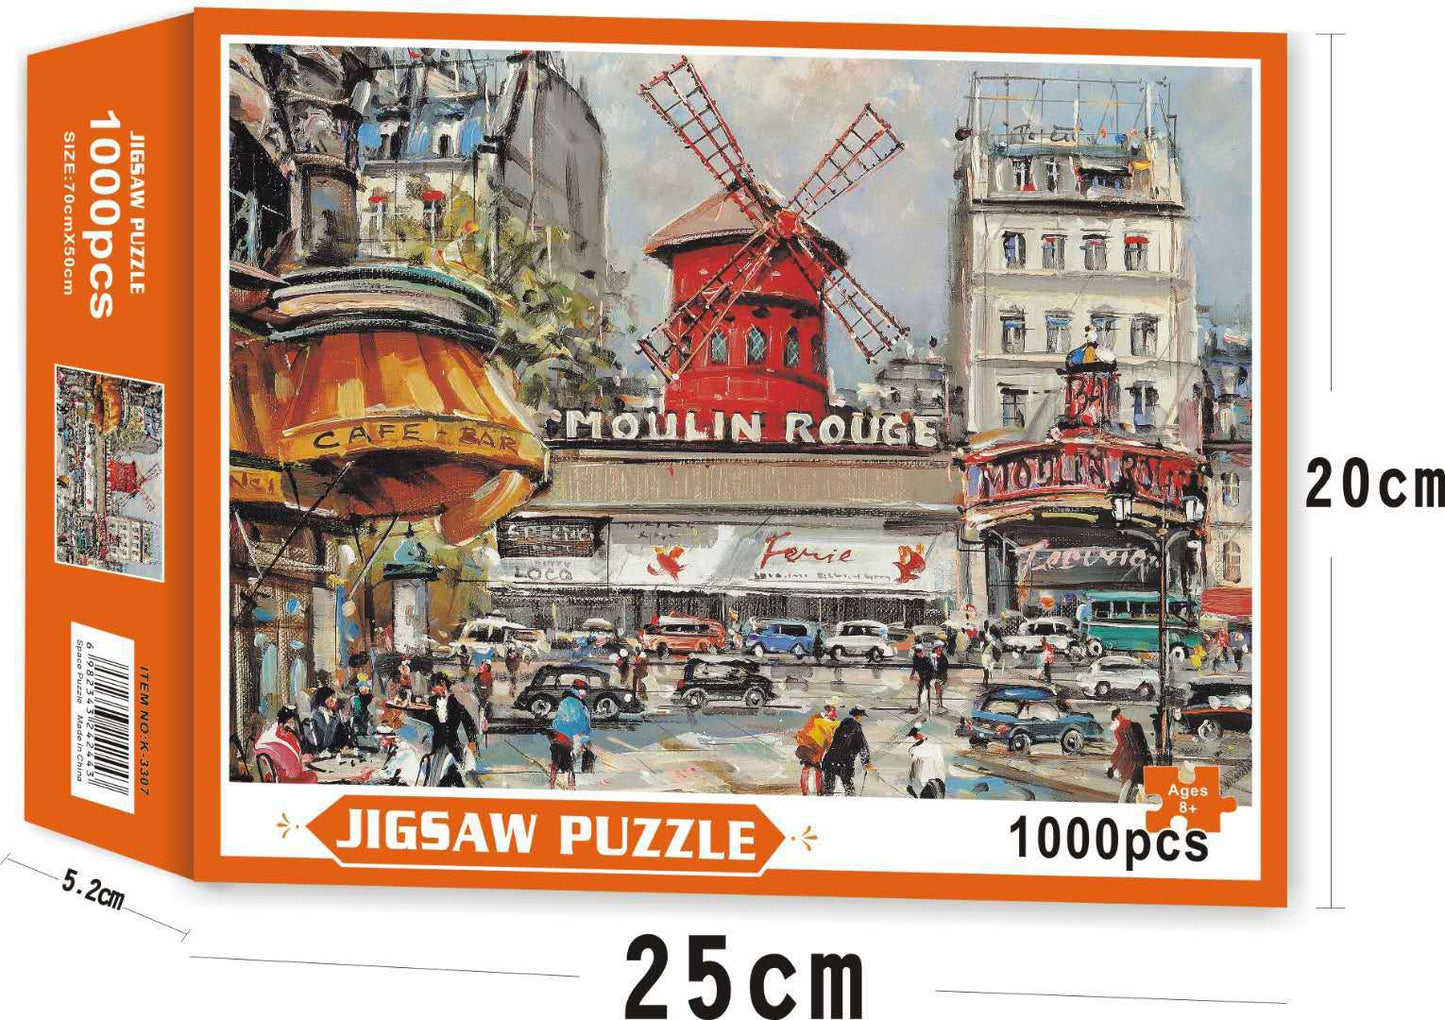 1000 piece puzzle Christmas gift Halloween toy adult landscape painting puzzle